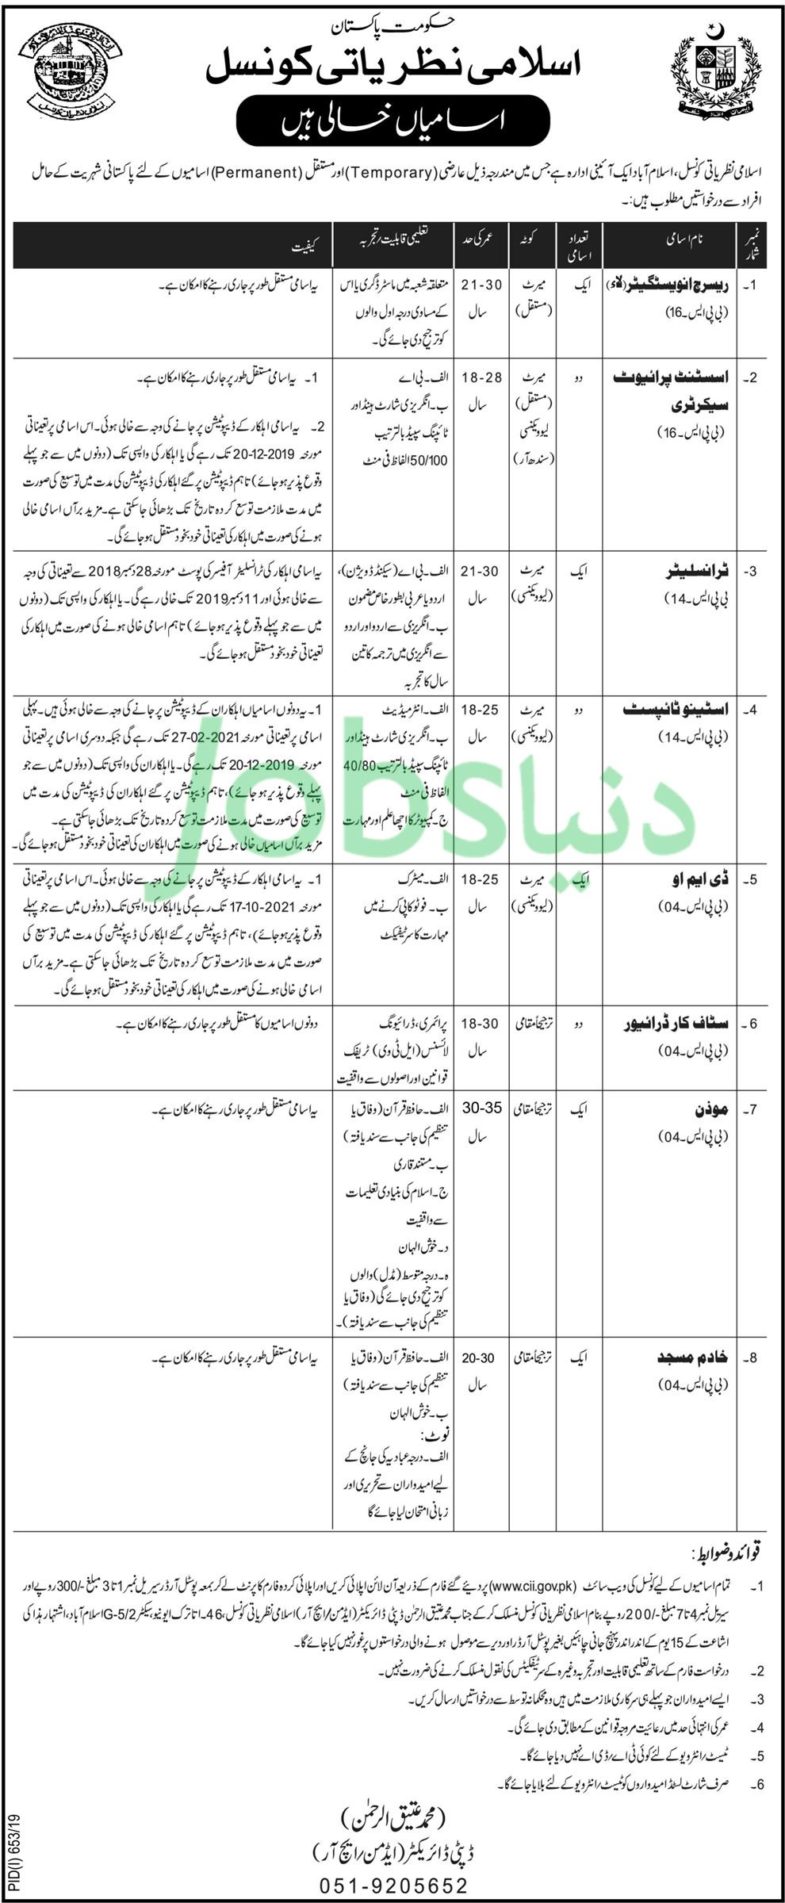 Council of Islamic Ideology Pakistan Jobs 2019 for Research Investigator, Stenotypists, Assistant PS, Translator, DMO and Other Staff